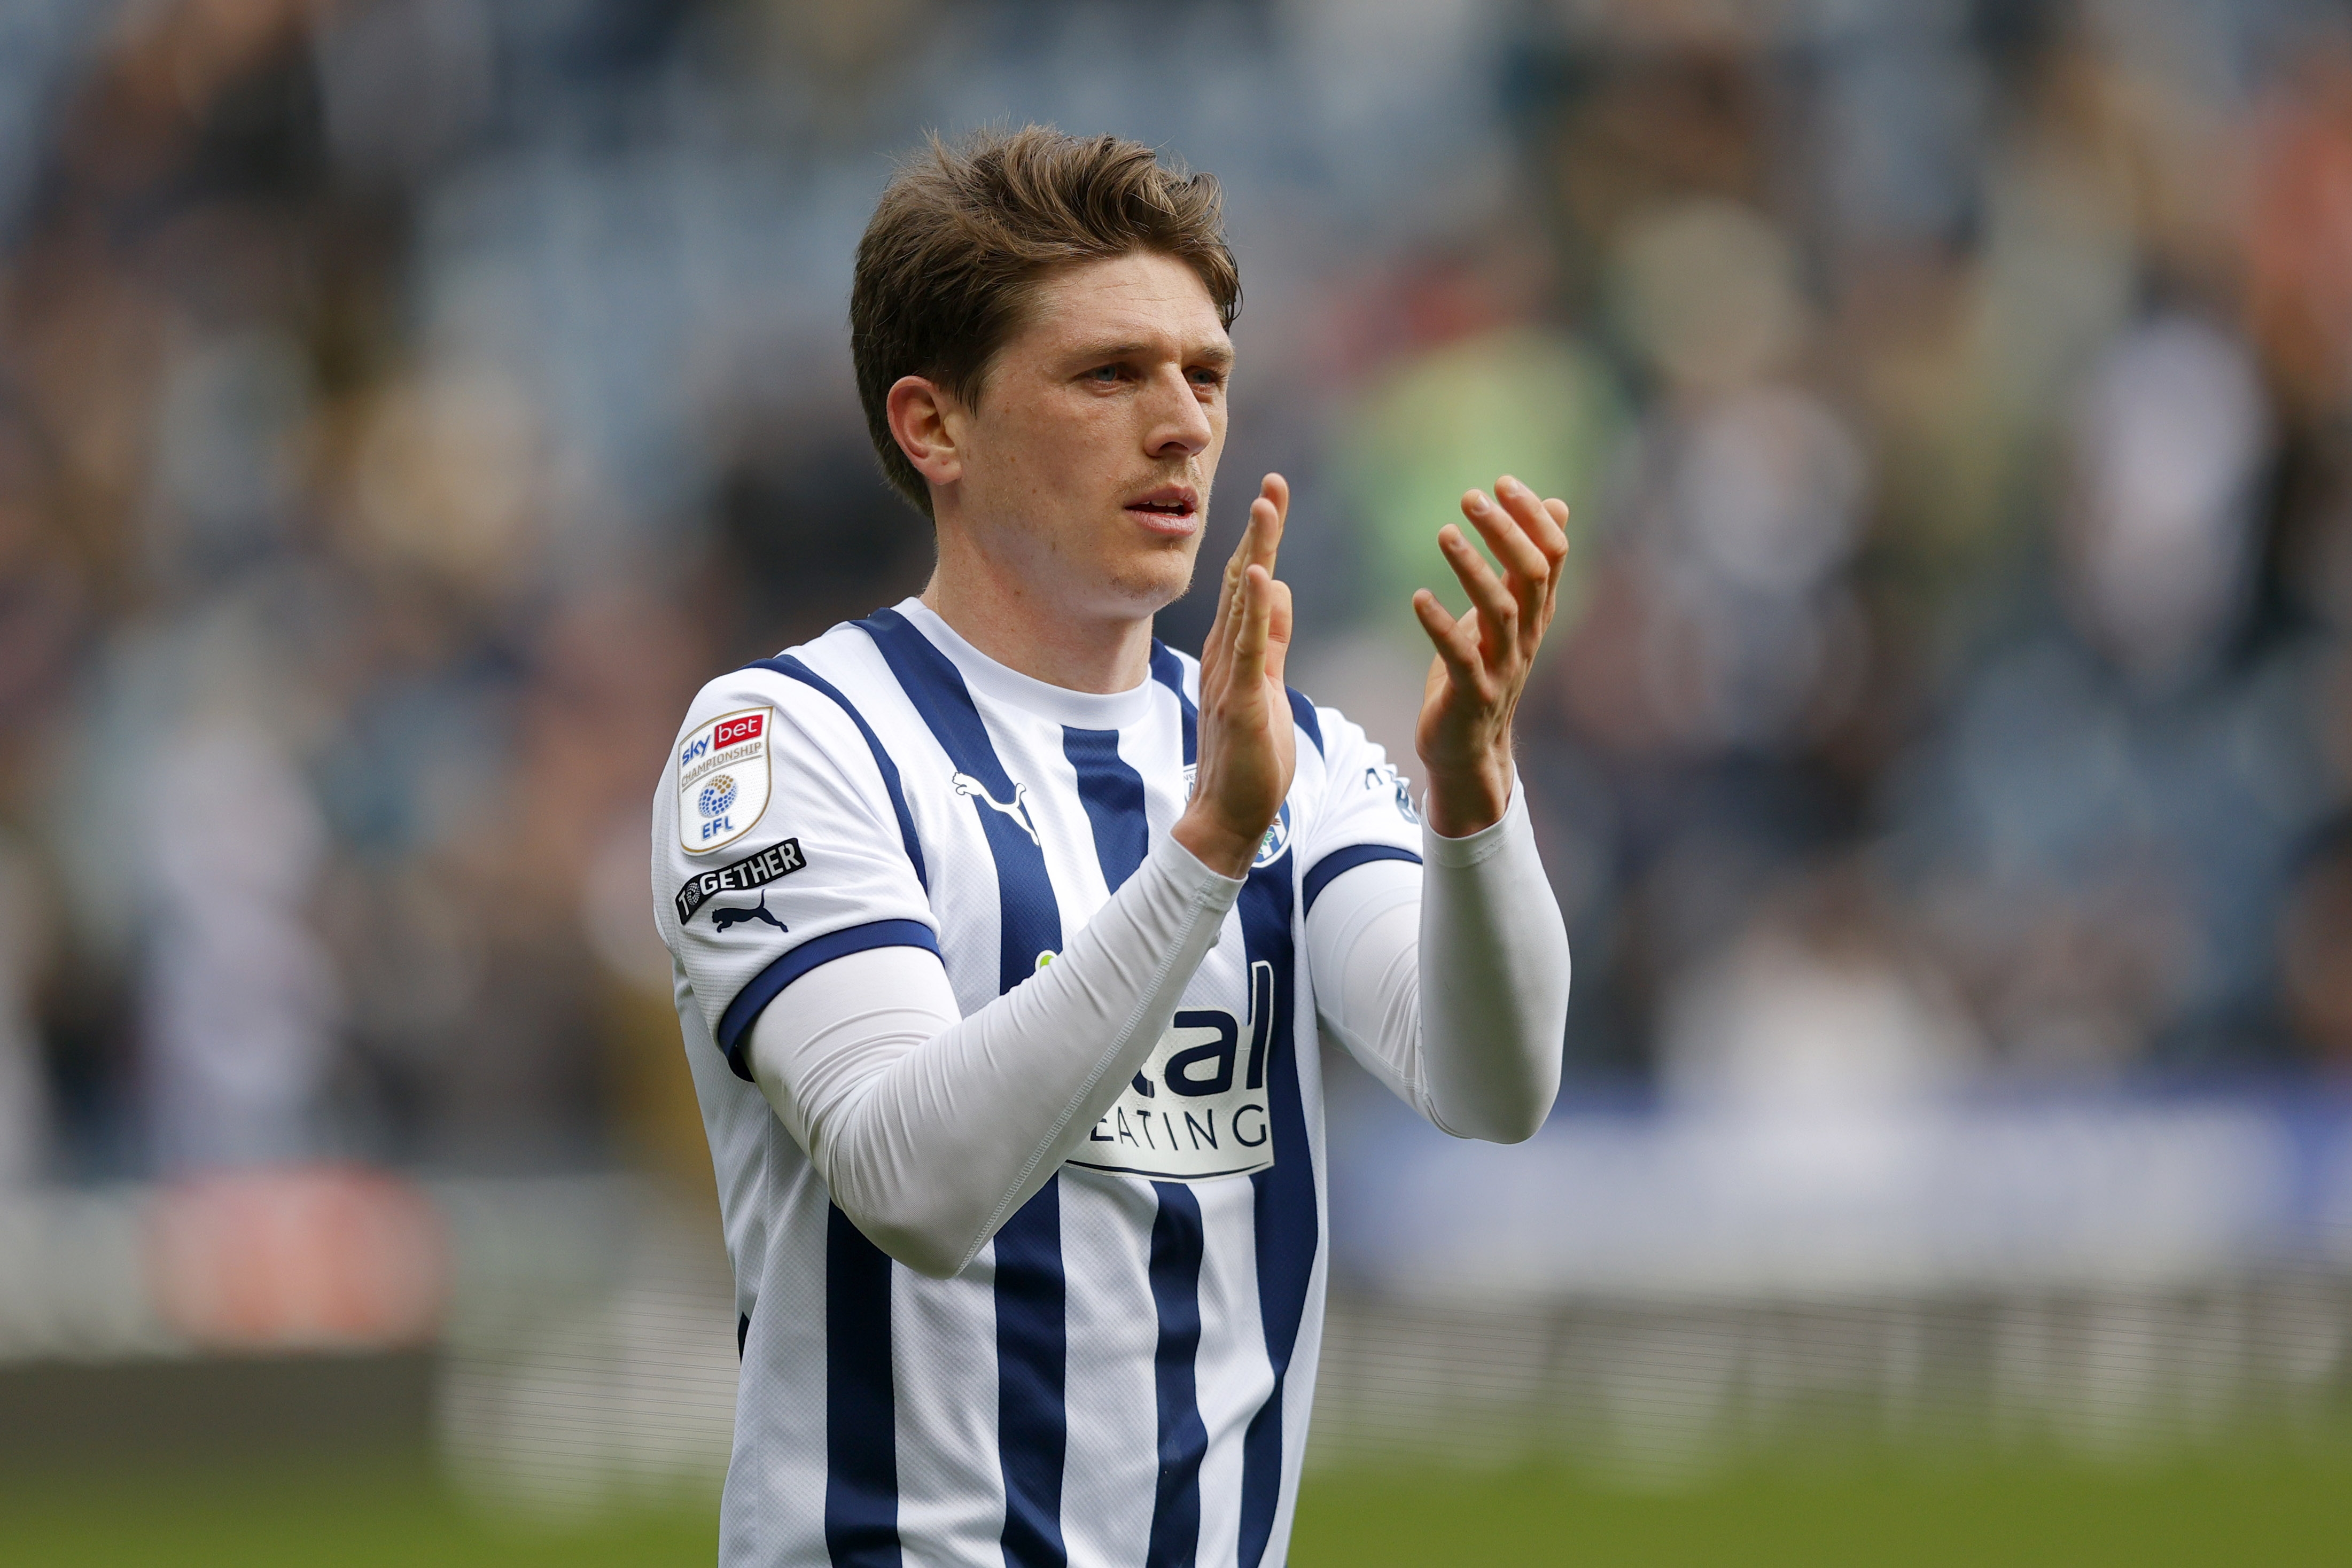 Adam Reach applauding supporters after the Watford game